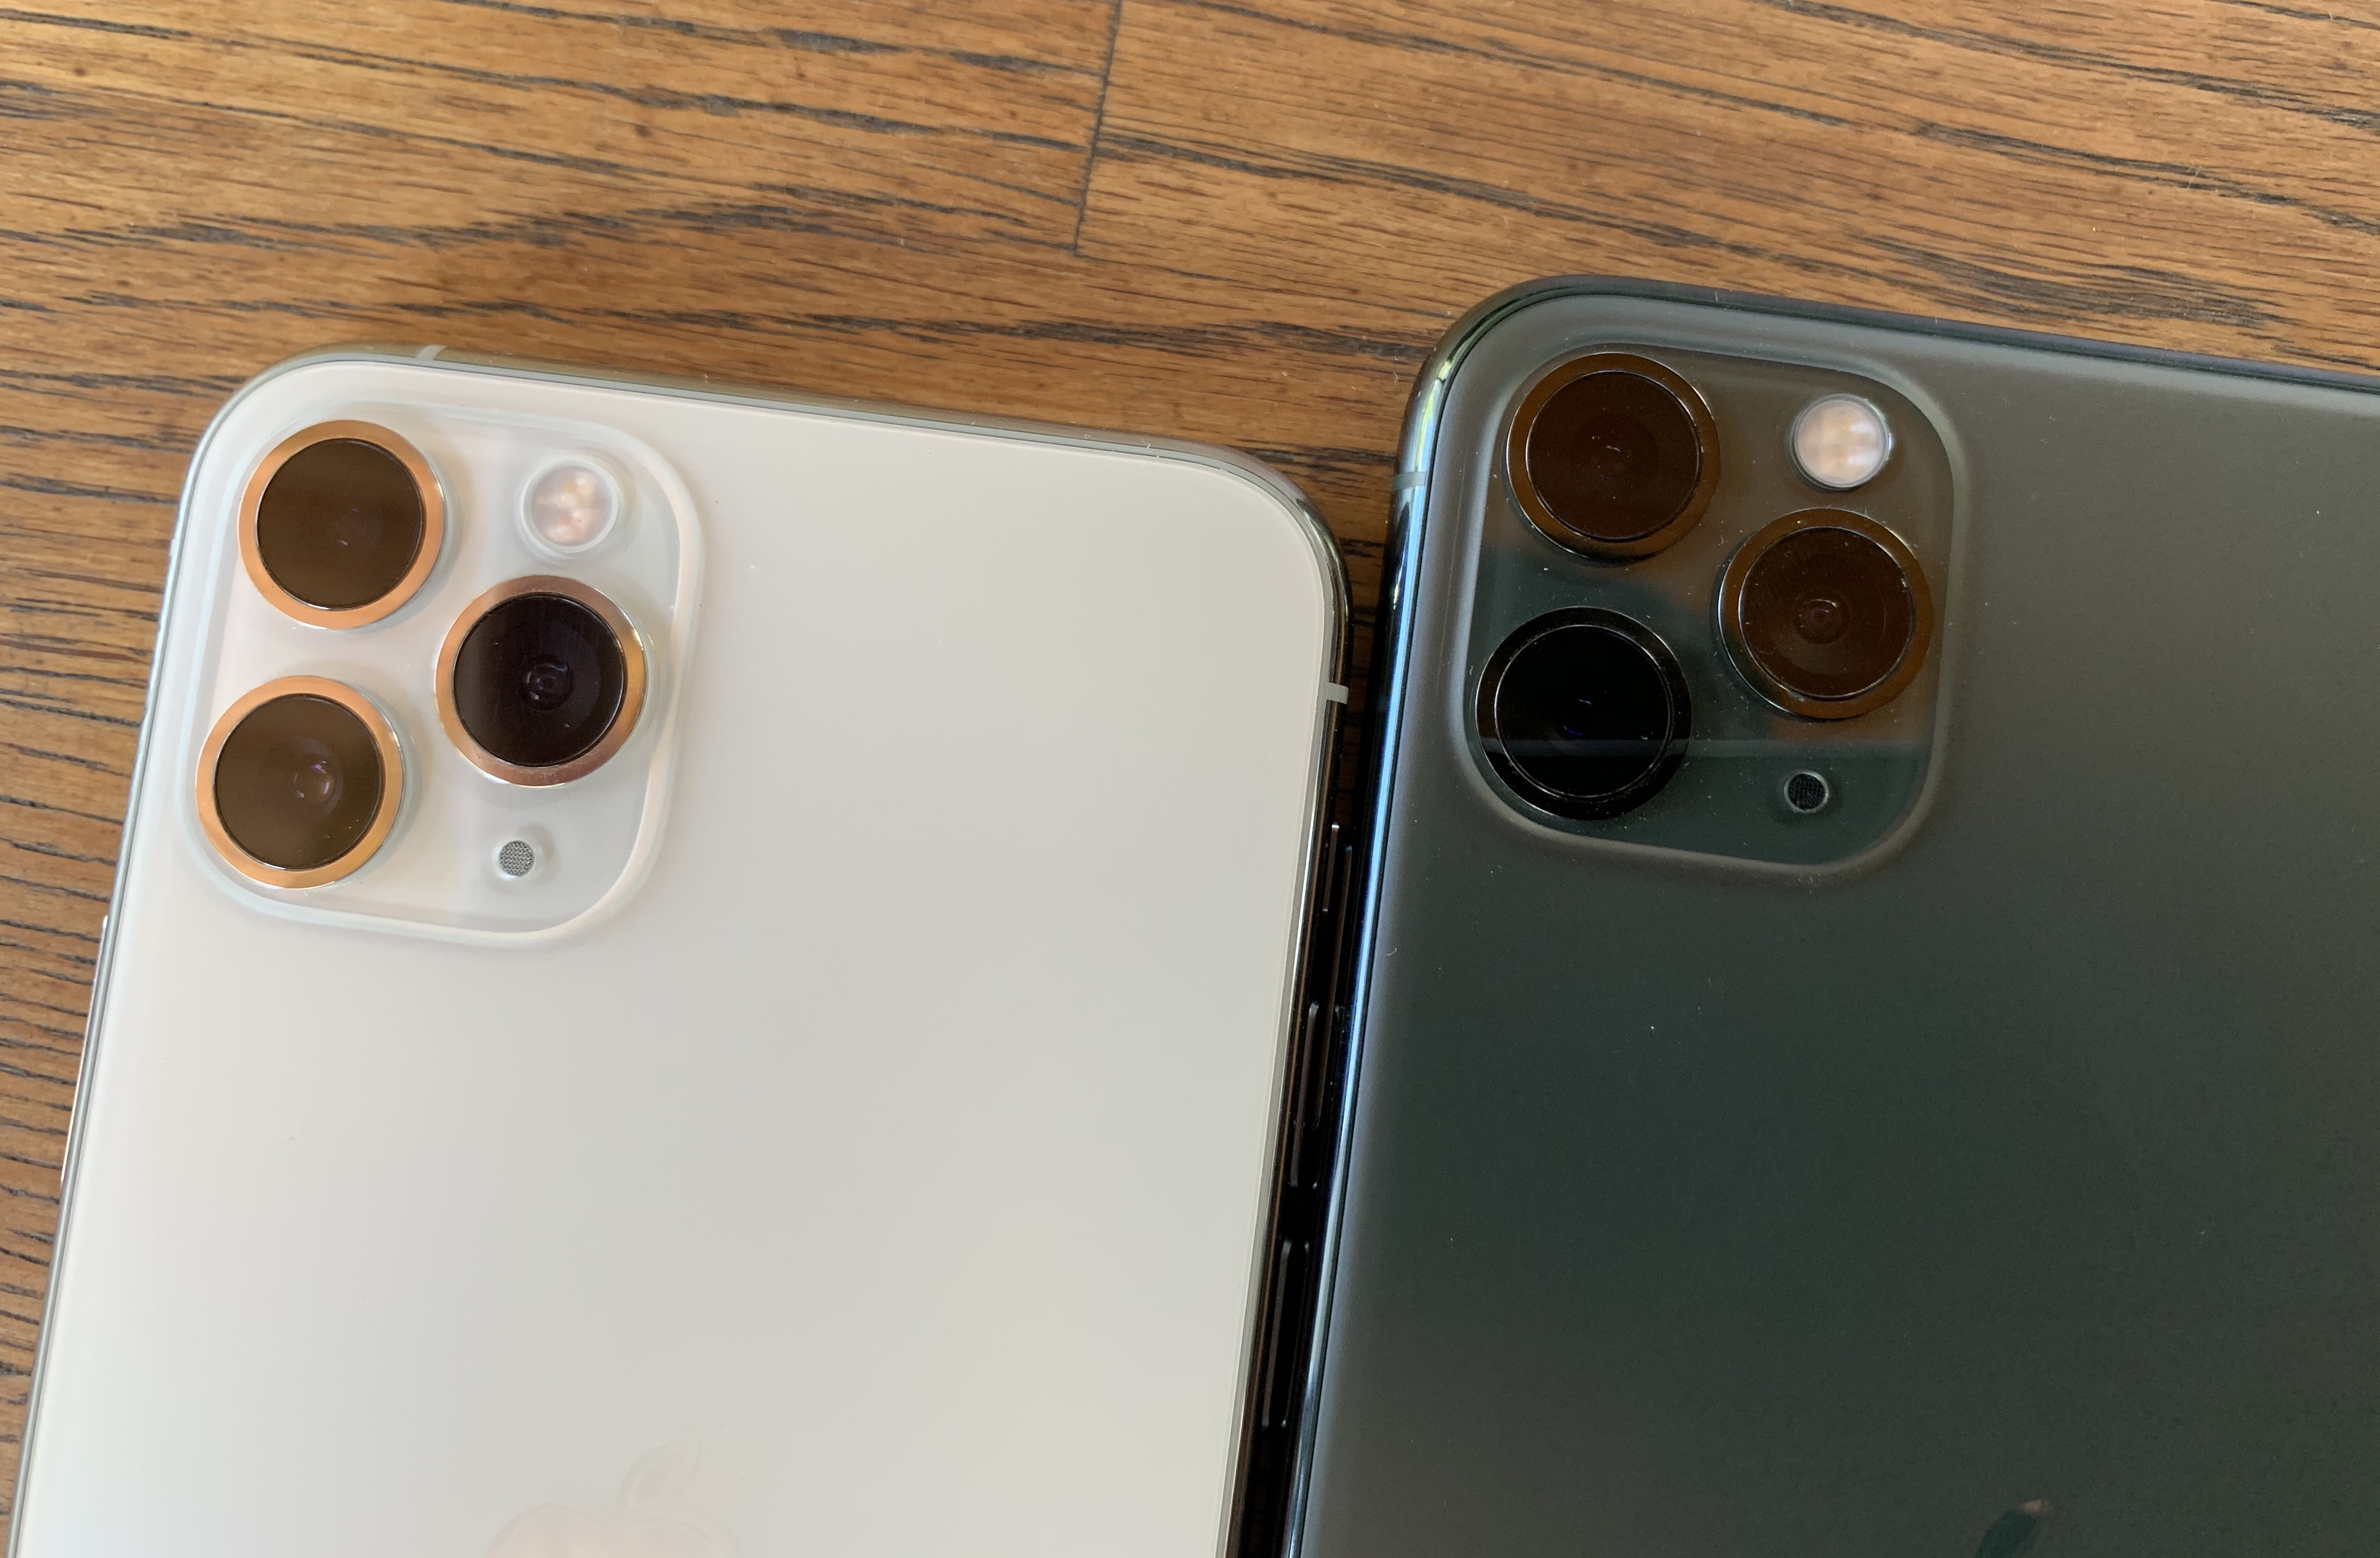 Iphone 11 Pro And 11 Pro Max Review High Quality For High Prices